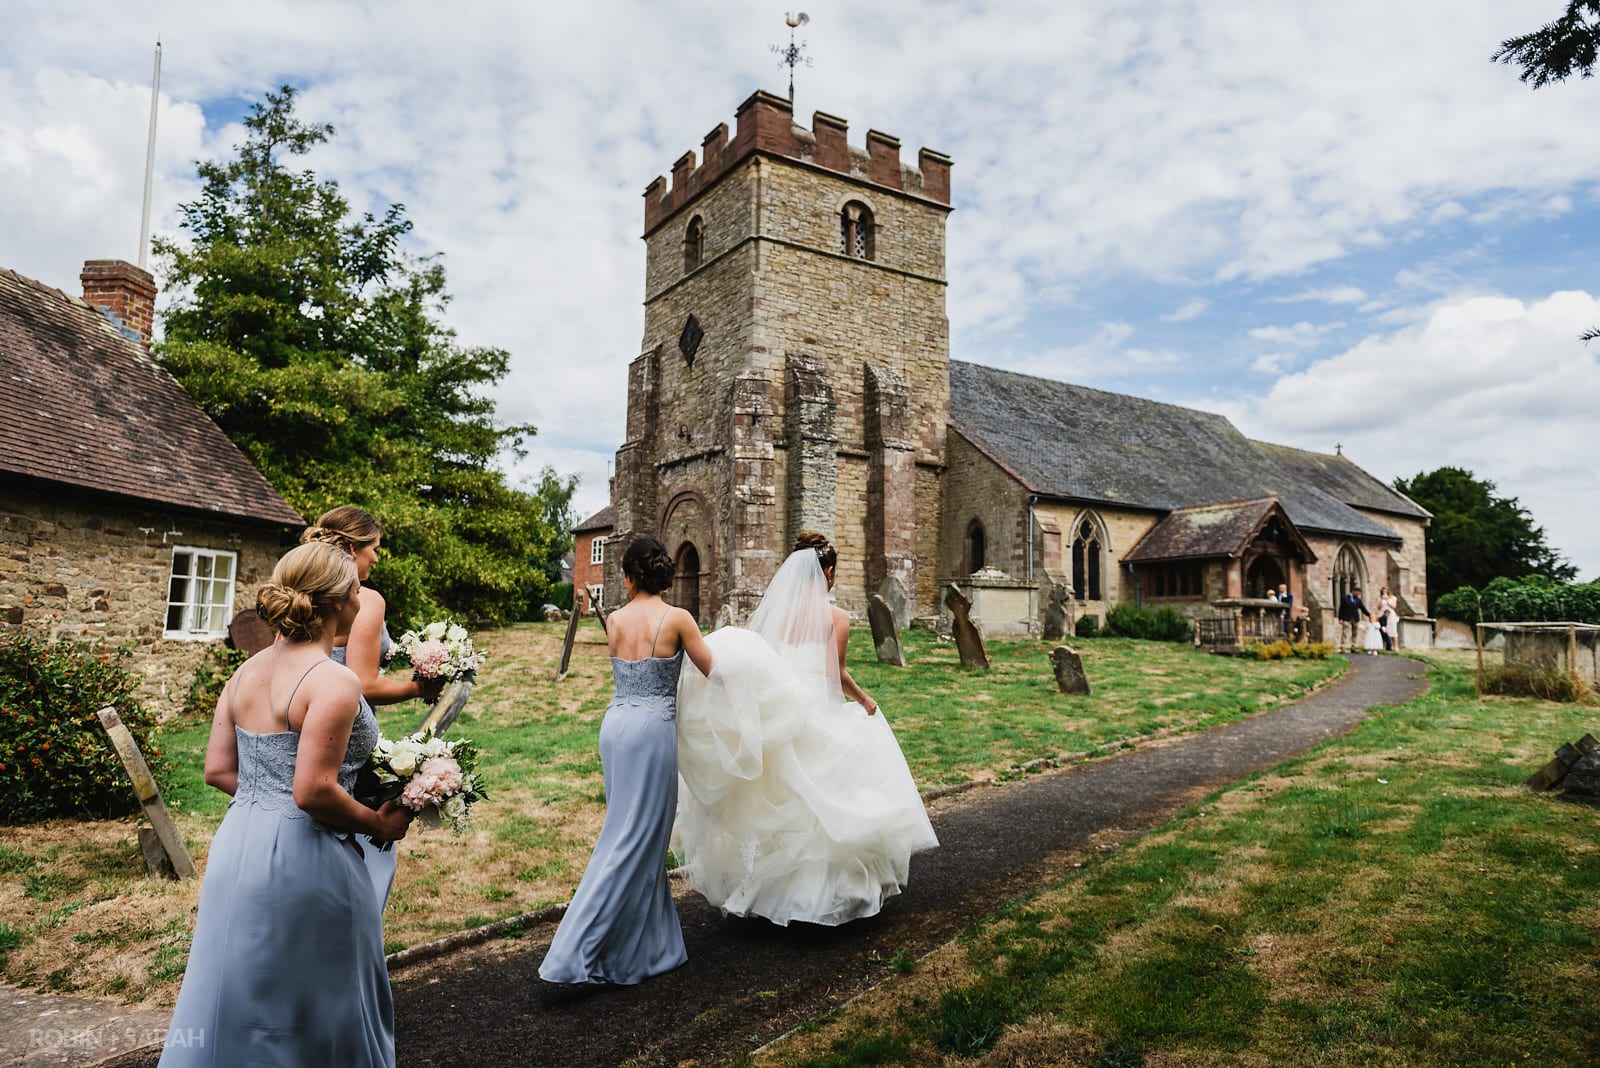 Bride walks up path to St Peter's Church in Diddlebury as bridesmaids help with dress